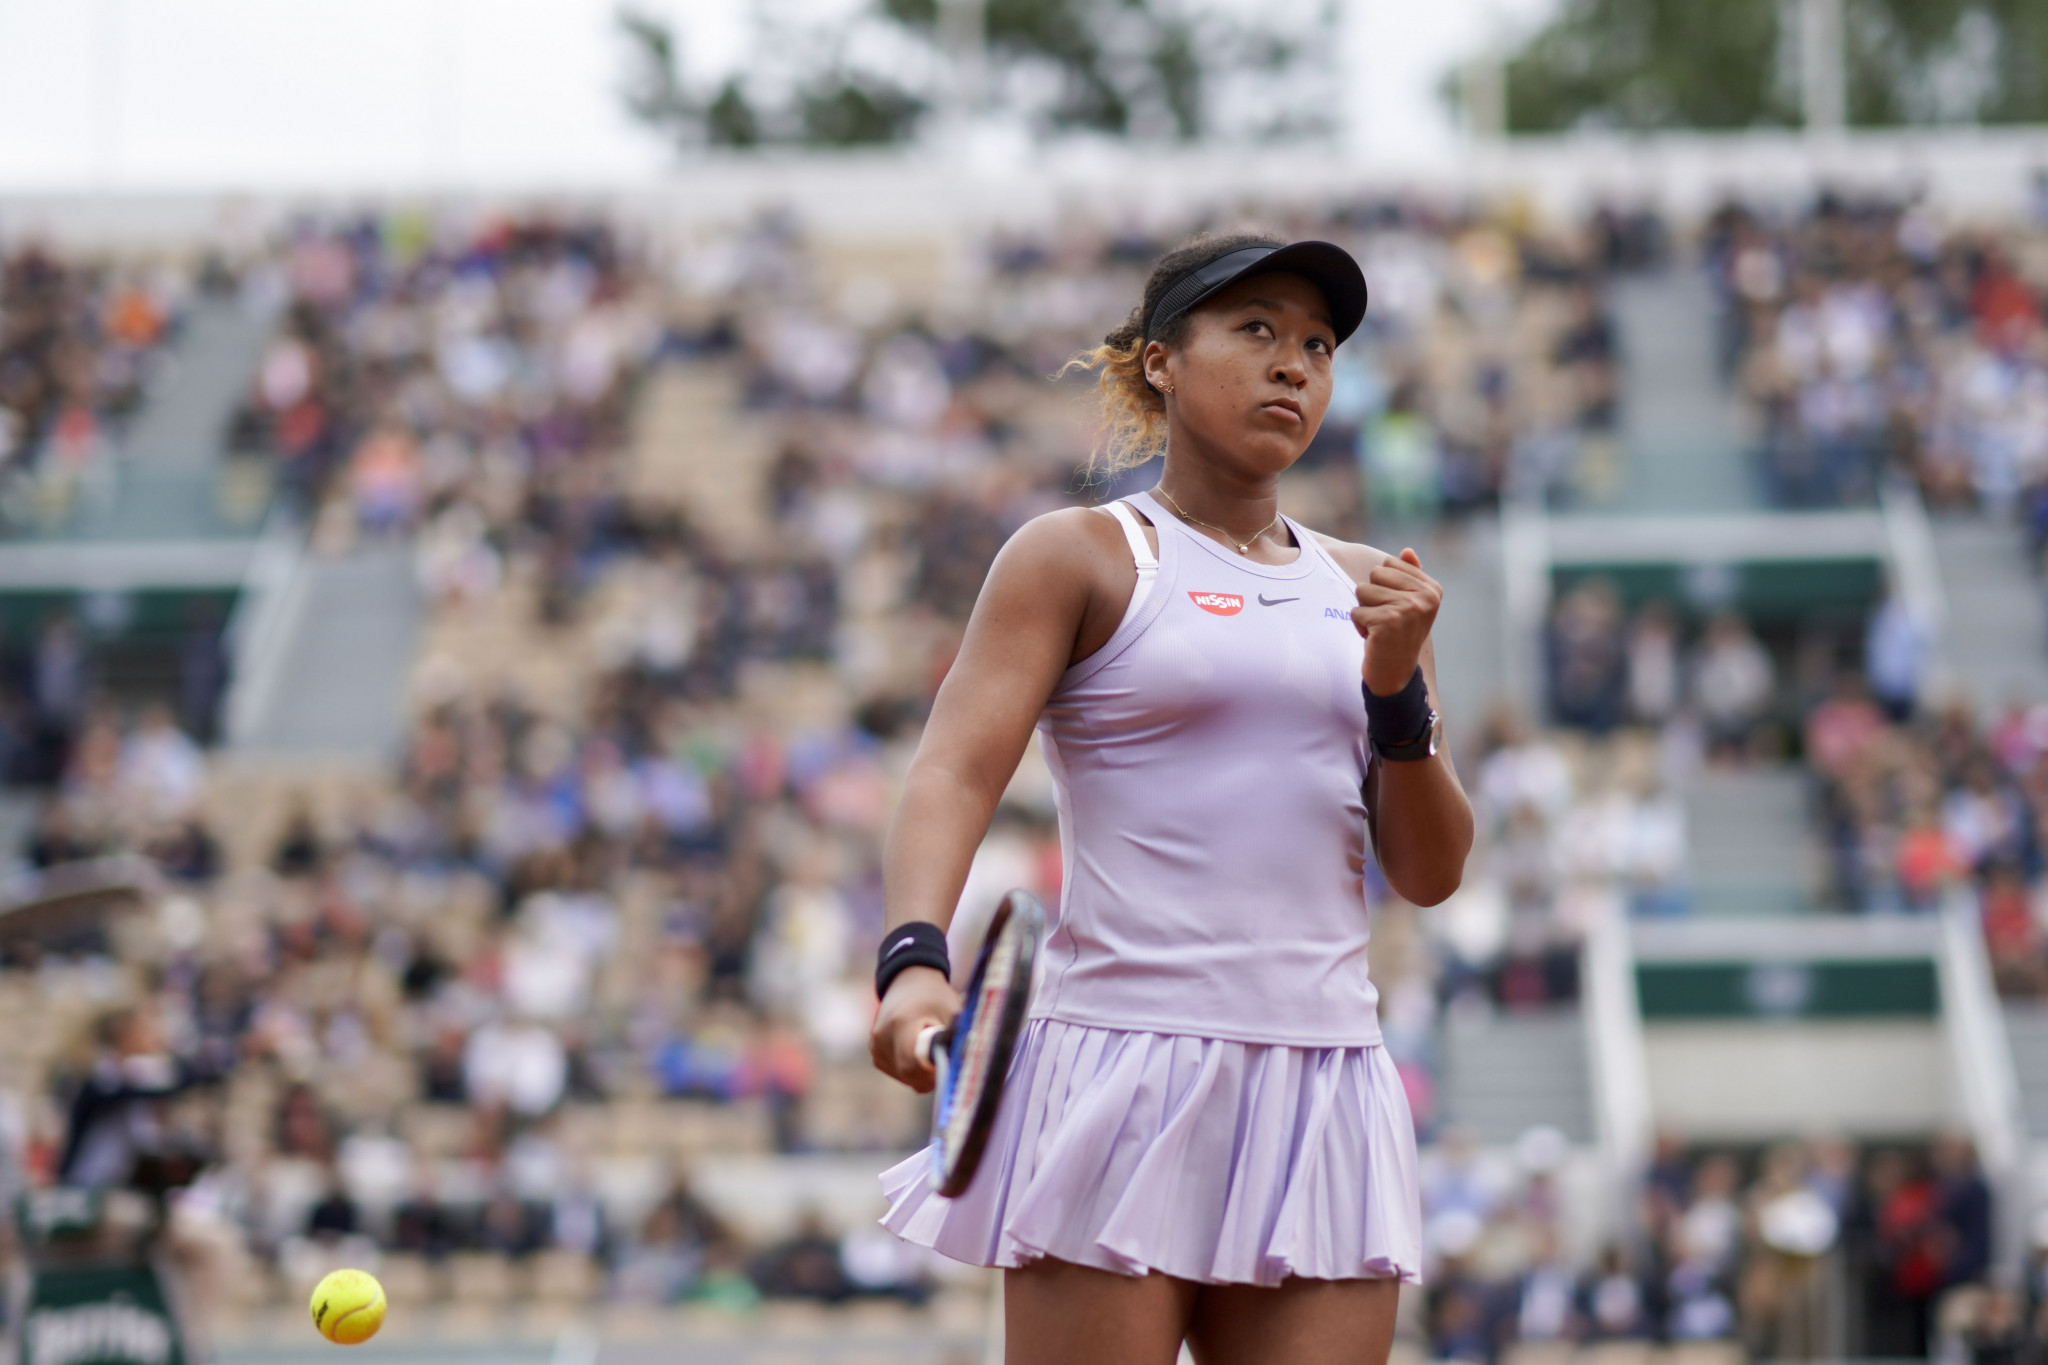 Japan's Naomi Osaka is seeking a third consecutive Grand Slam title but had to battle her way back against Victoria Azarenka of Belarus to reach the third round of the French Open ©Getty Images